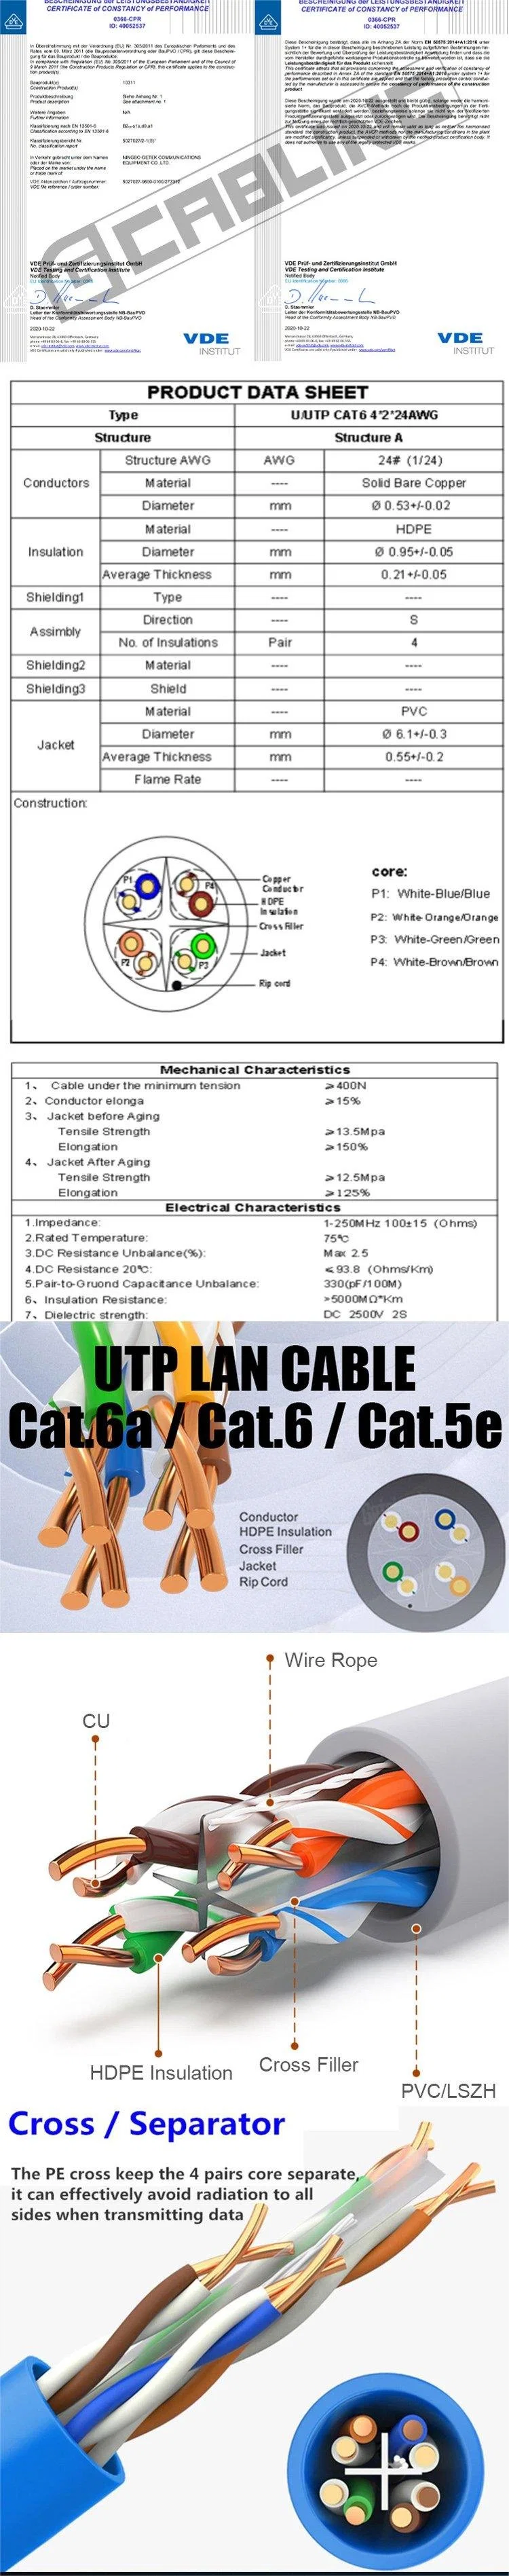 Gcabling Communication Cat5e and Cat6e CAT6 Cable 1000FT UTP Cheapest LAN Cables Cat 6 Price Per Meter